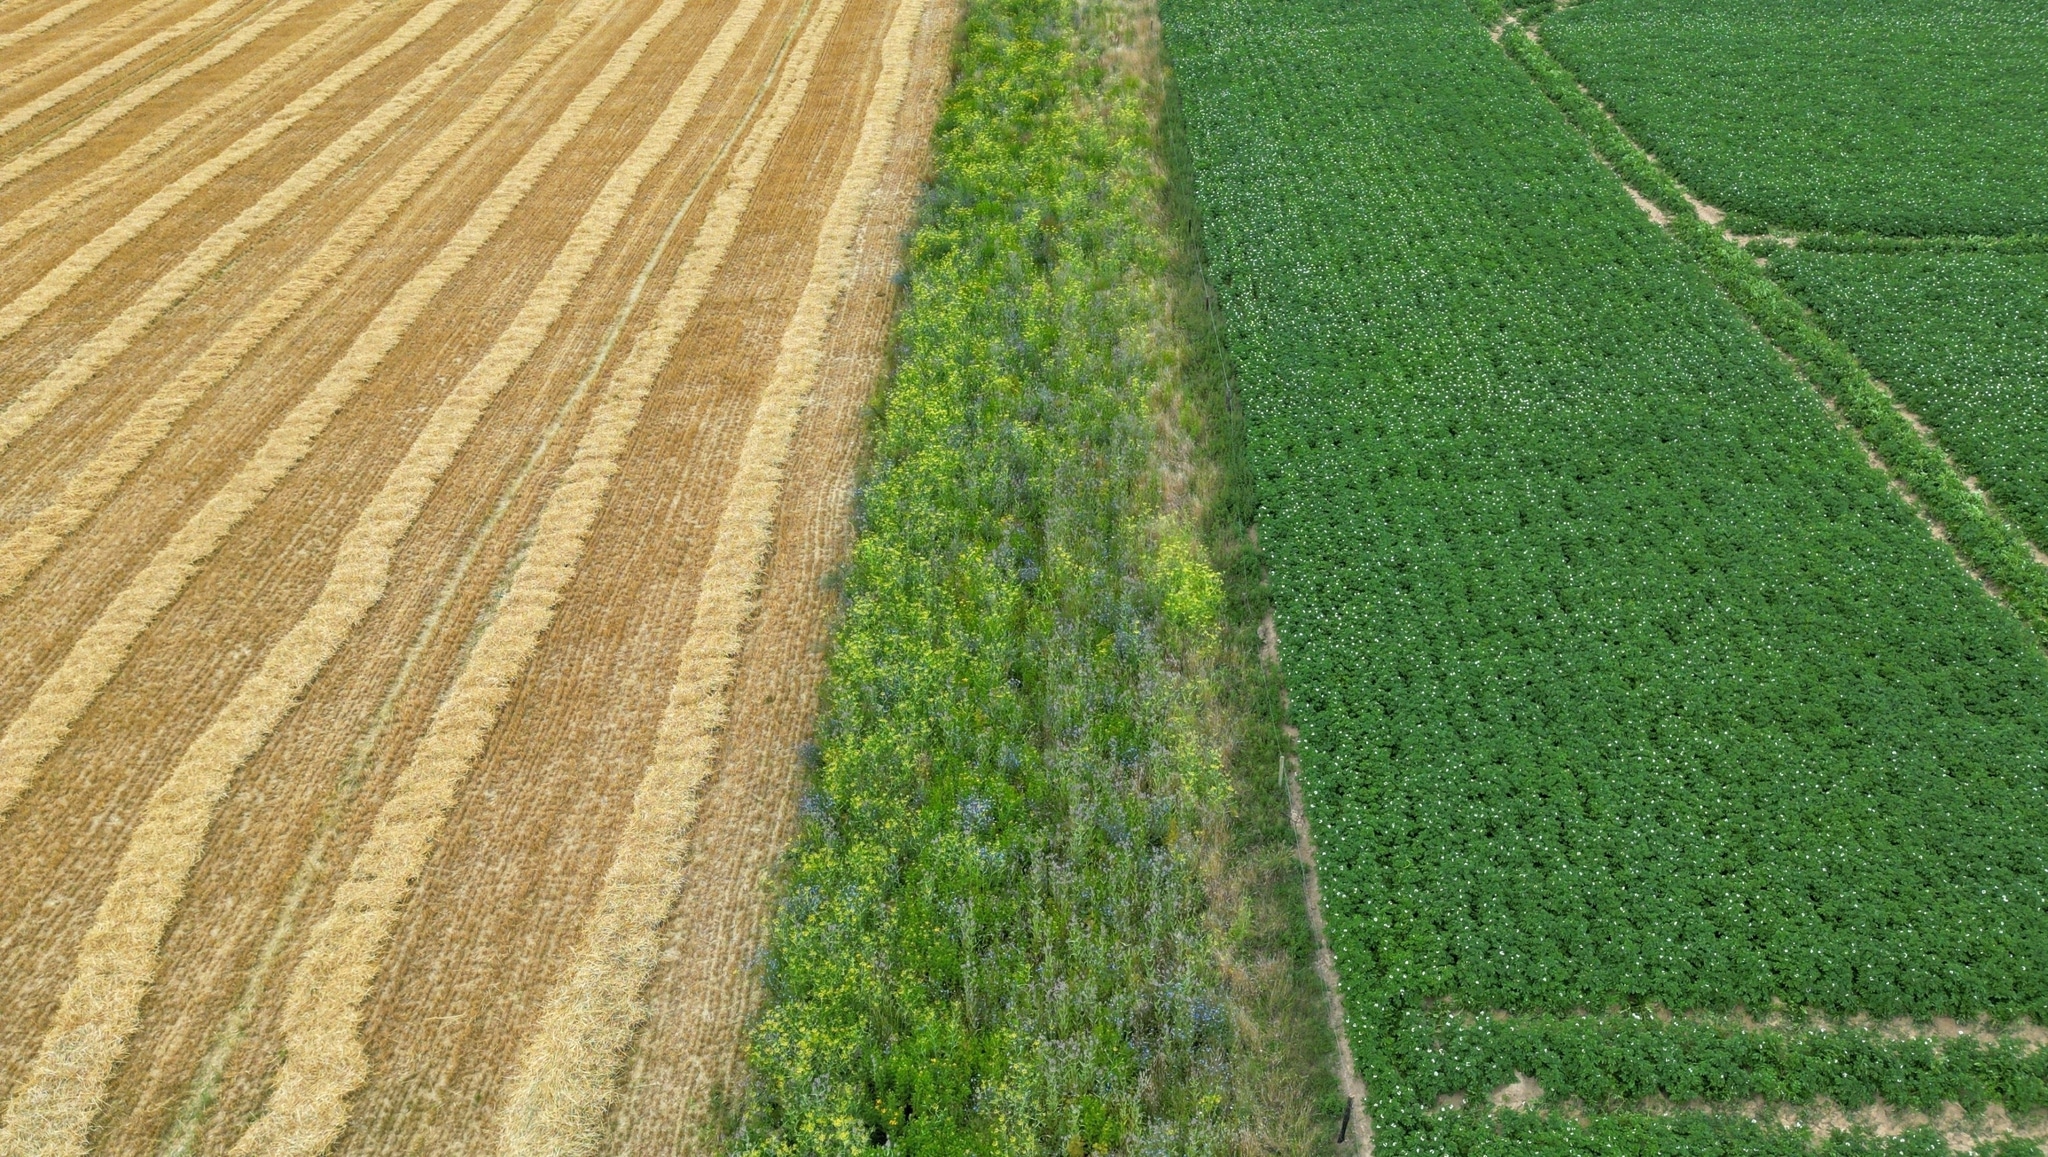 An aerial view of a flower strip between harvested barley on the left and potatoes on the right